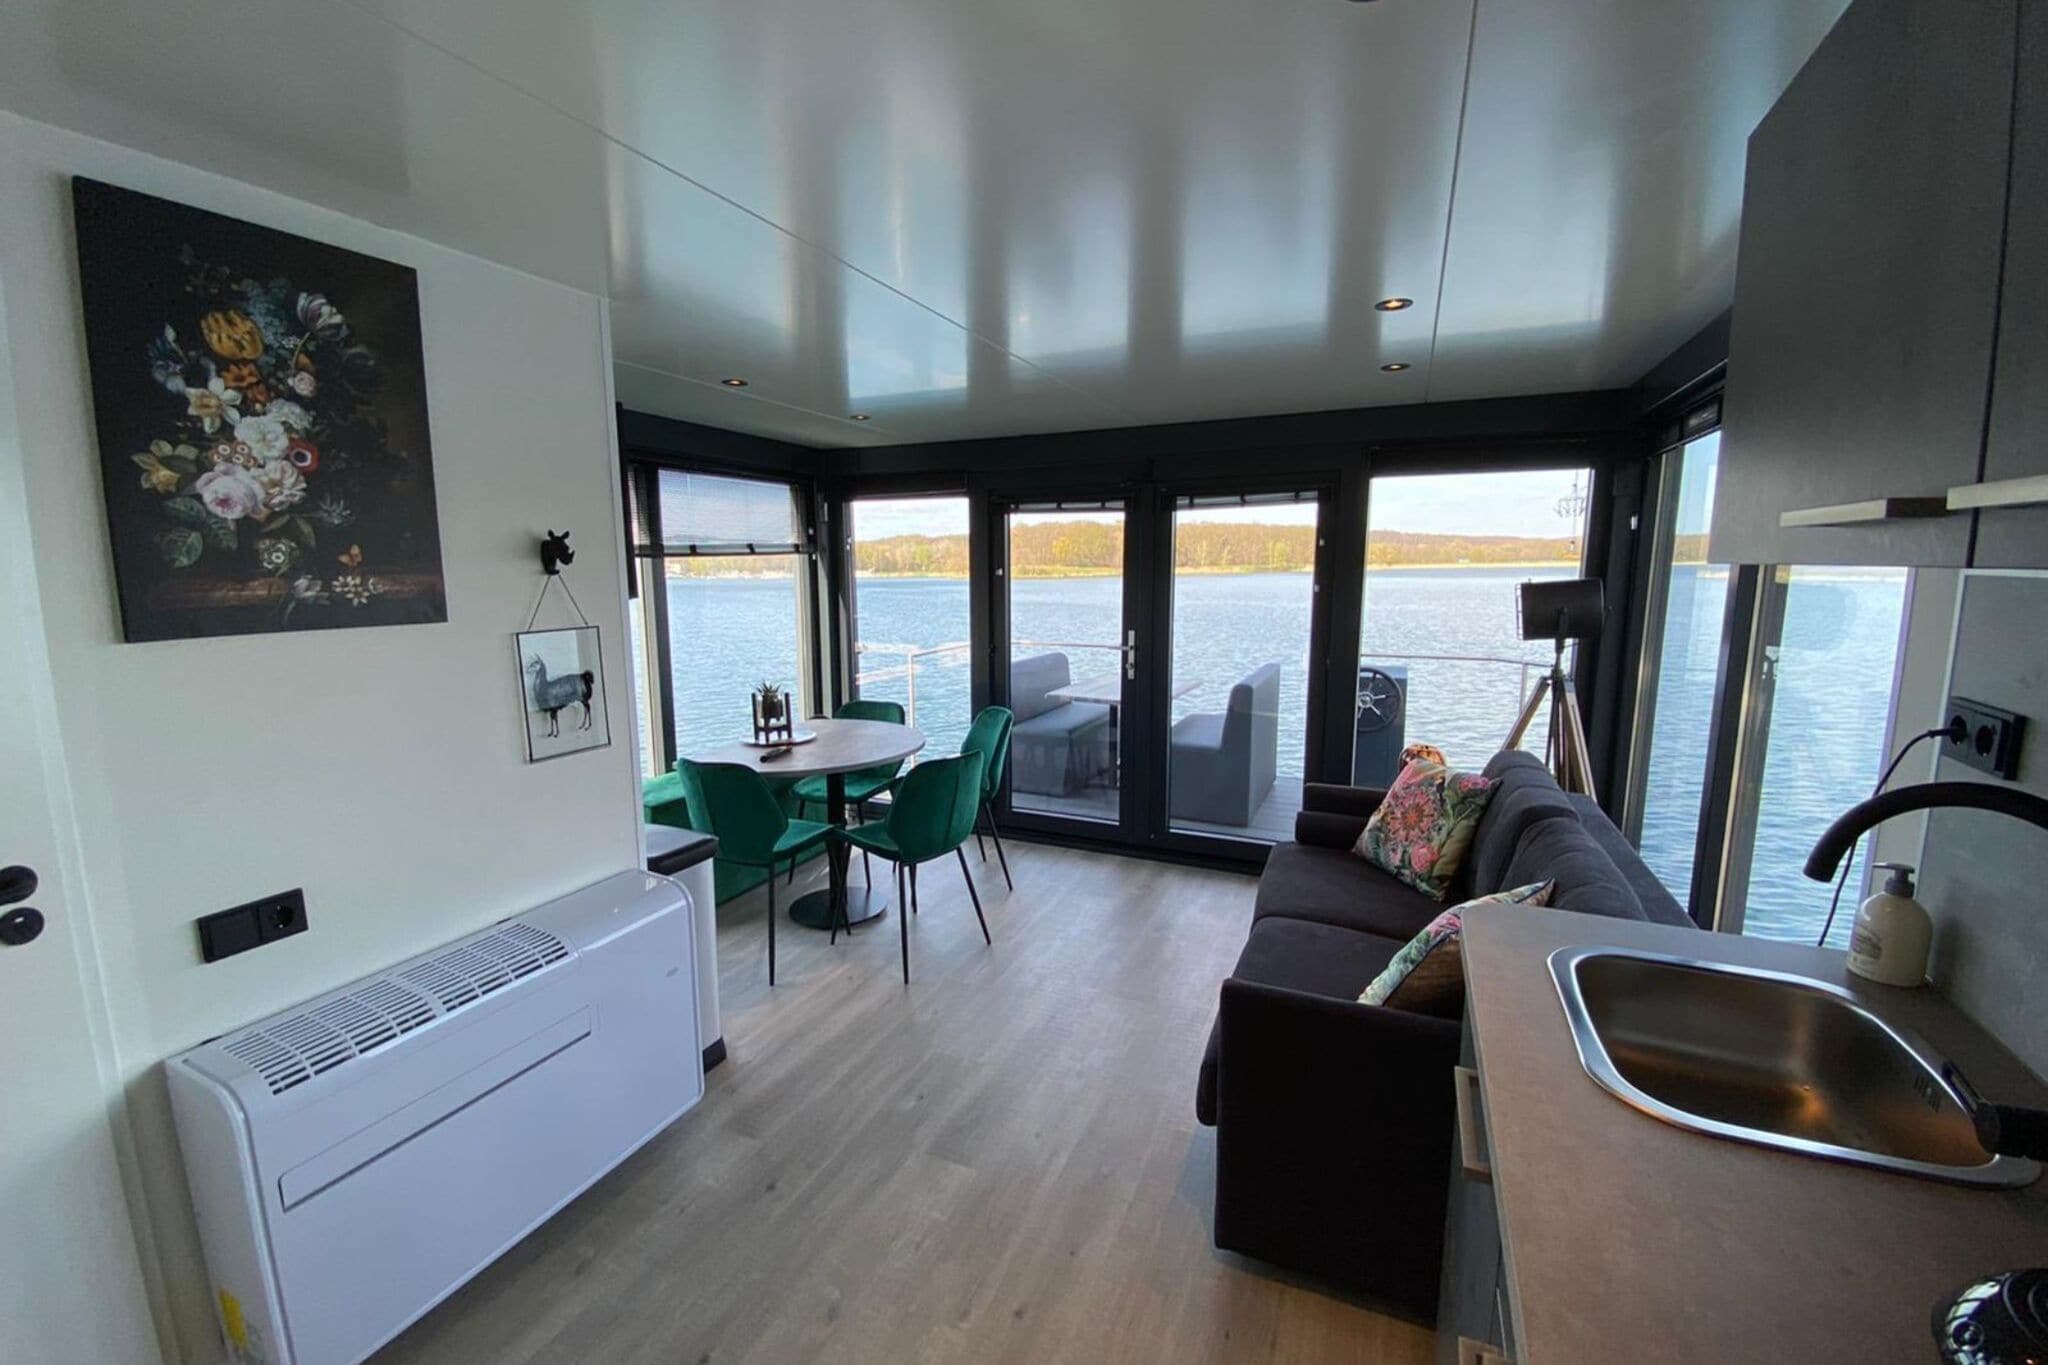 Luxury houseboat with beautiful views